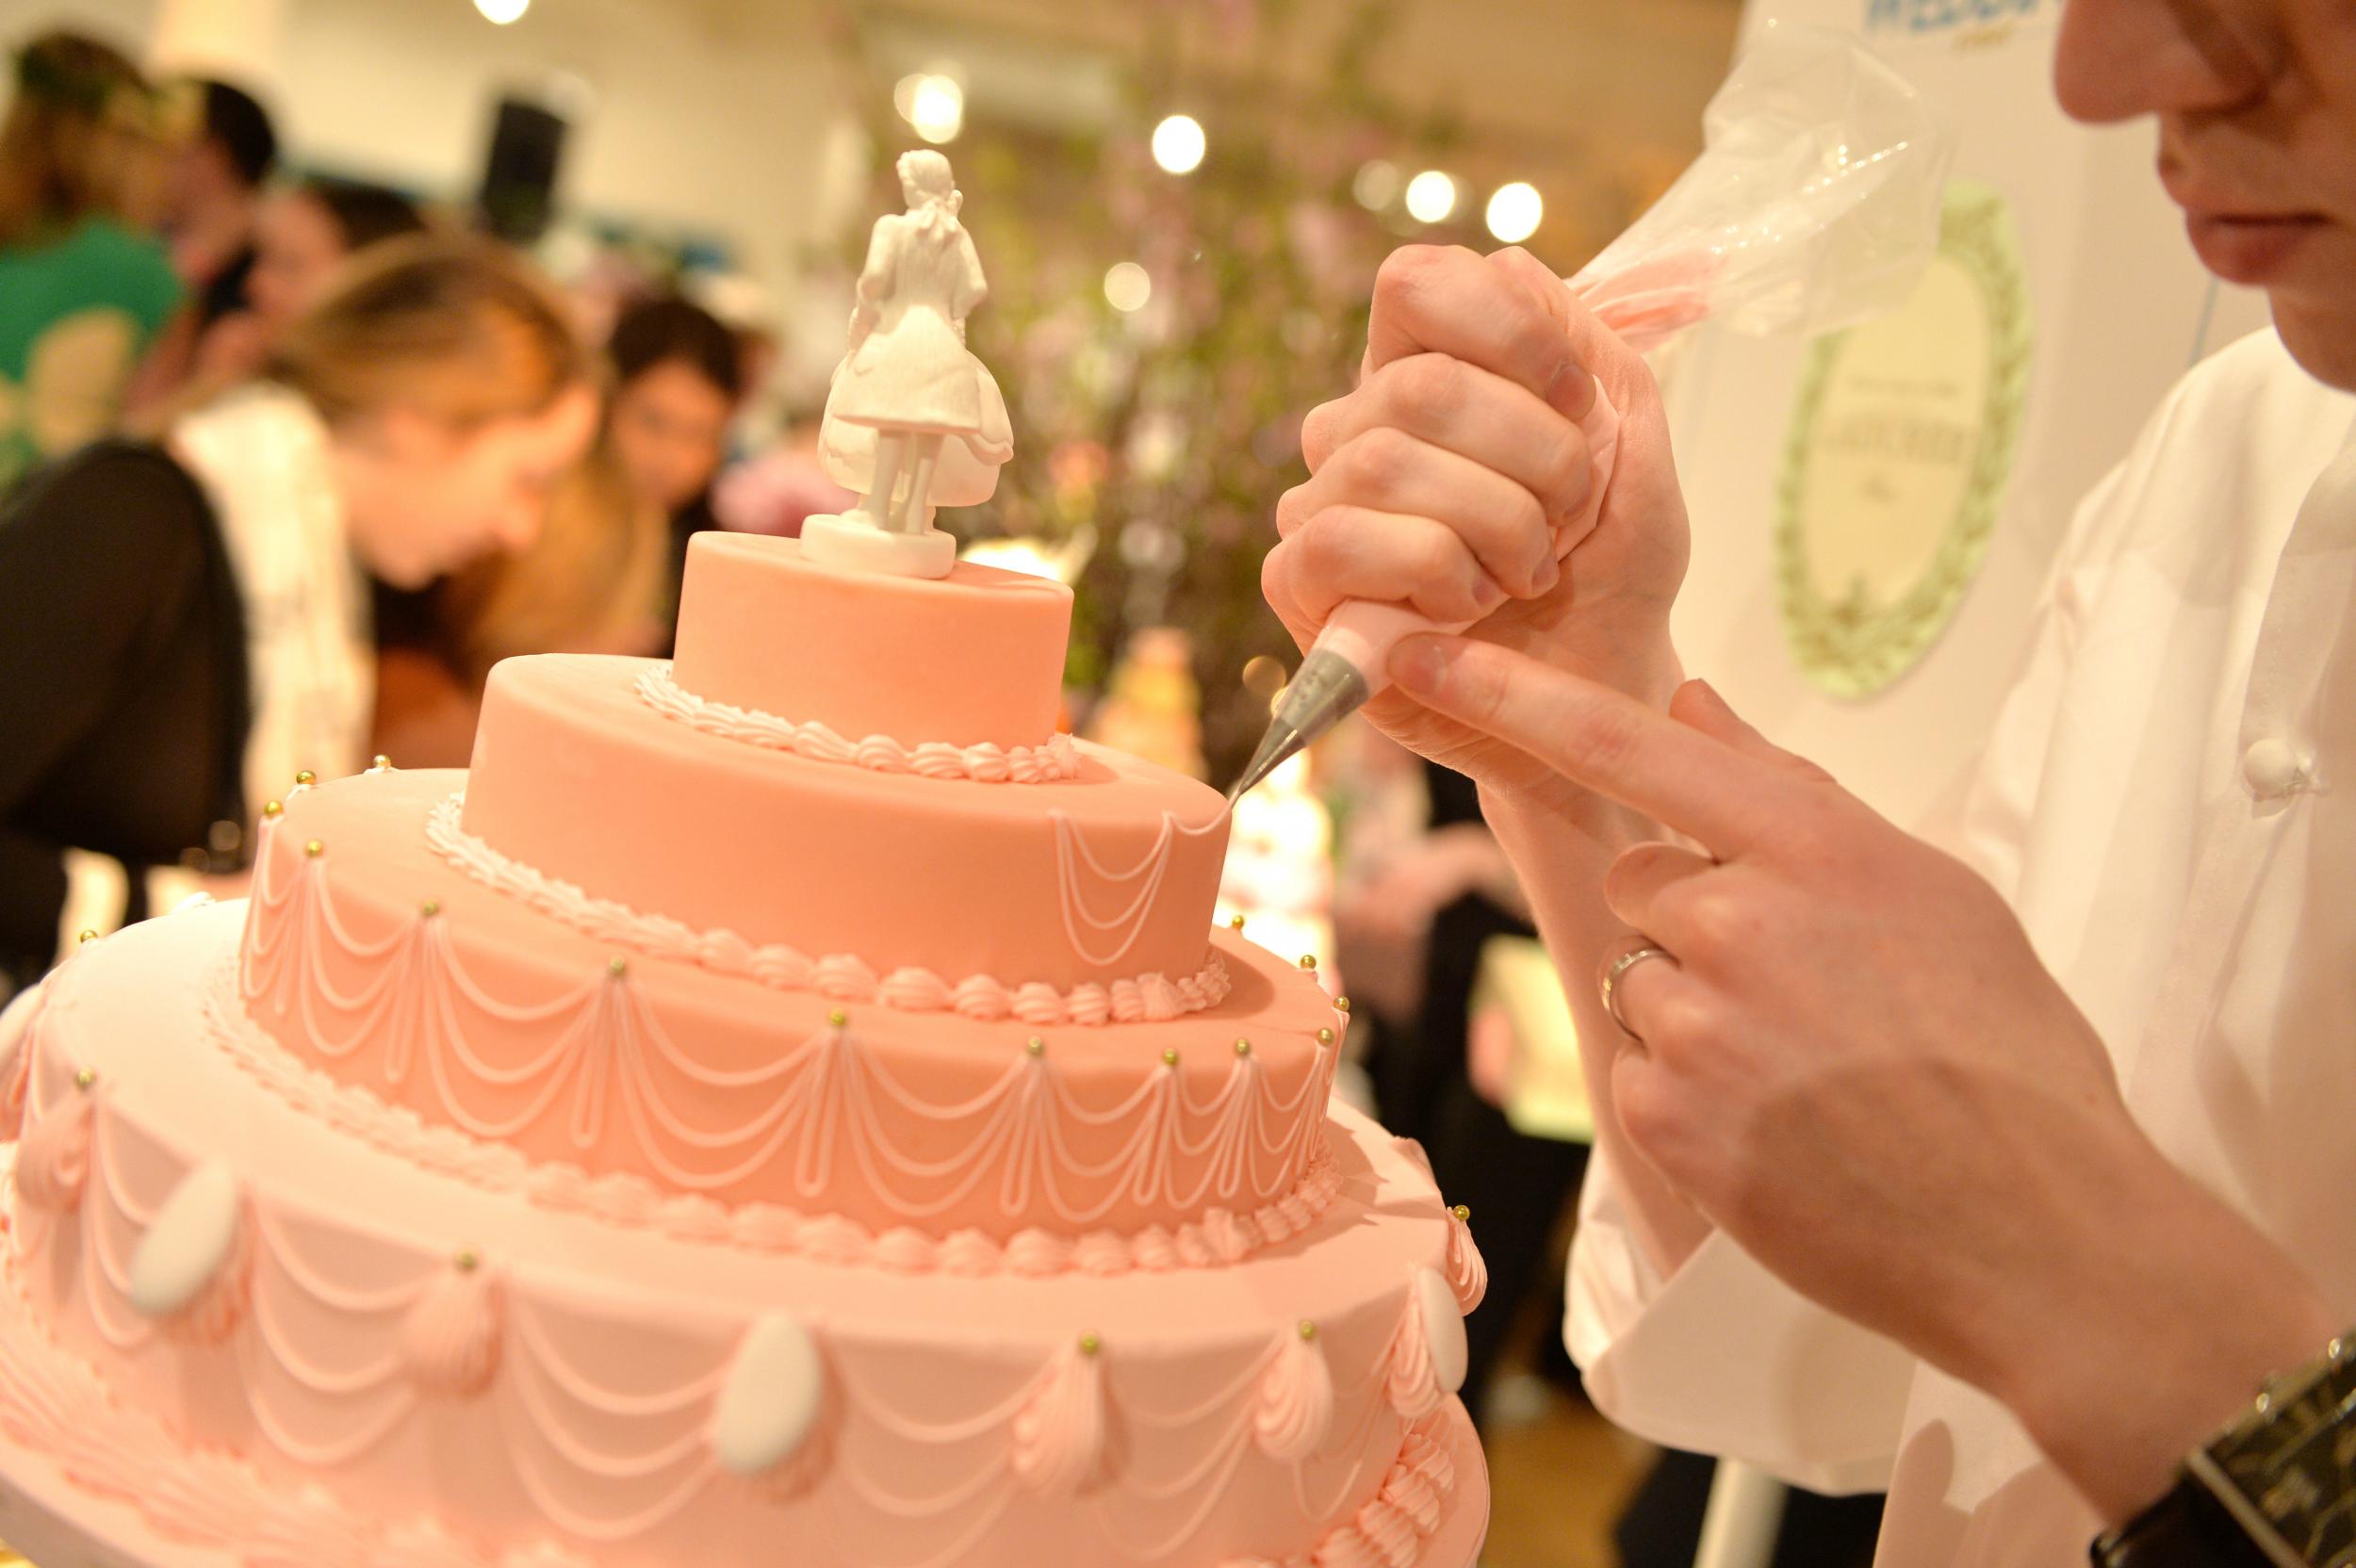 A stock photo of a wedding cake is pictured being worked on